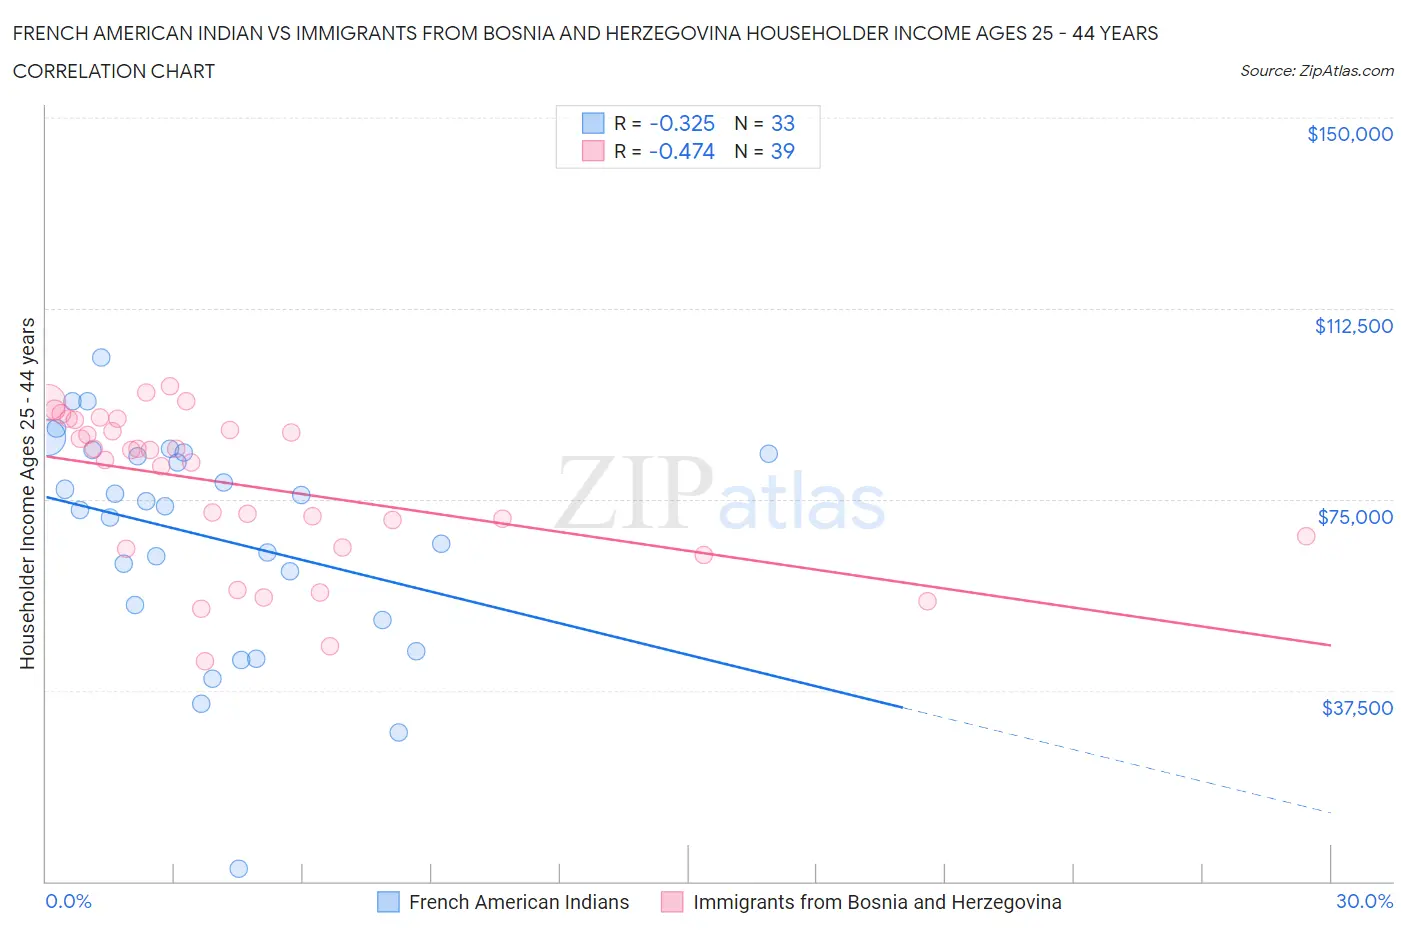 French American Indian vs Immigrants from Bosnia and Herzegovina Householder Income Ages 25 - 44 years